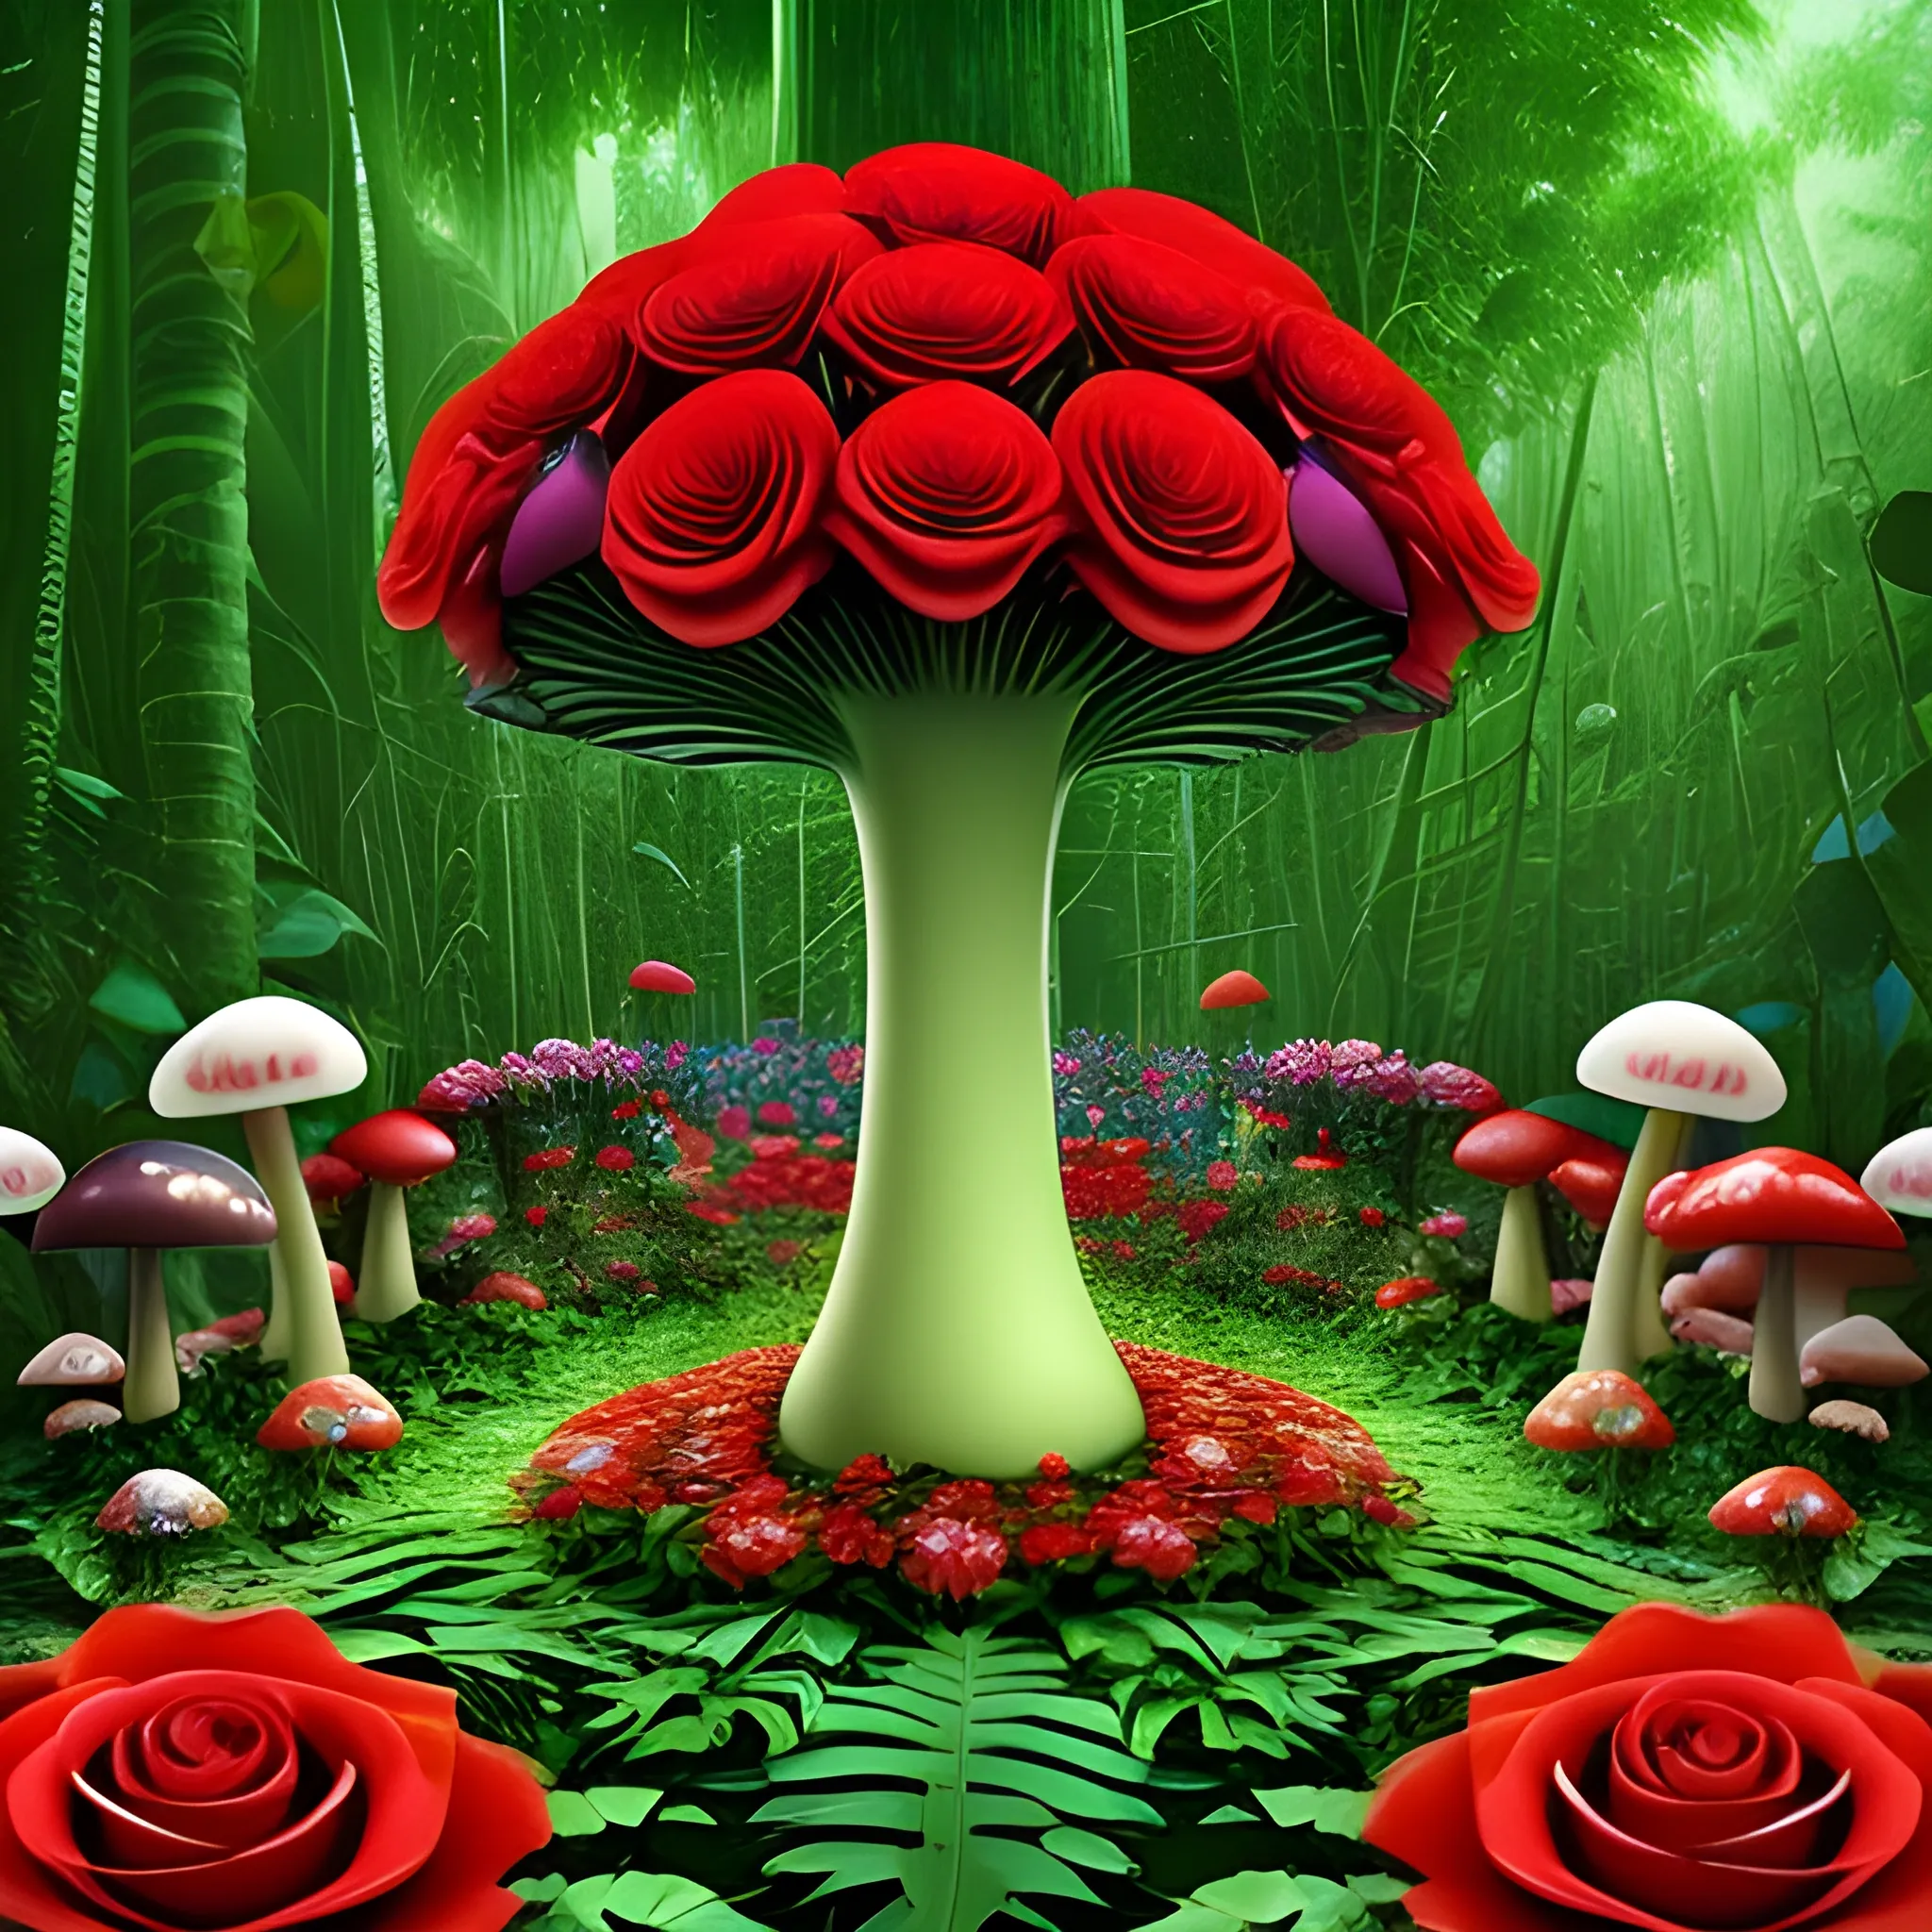 Jungle full of red roses, and flowers of the different colors and different colors mushroom,3D, Trippy